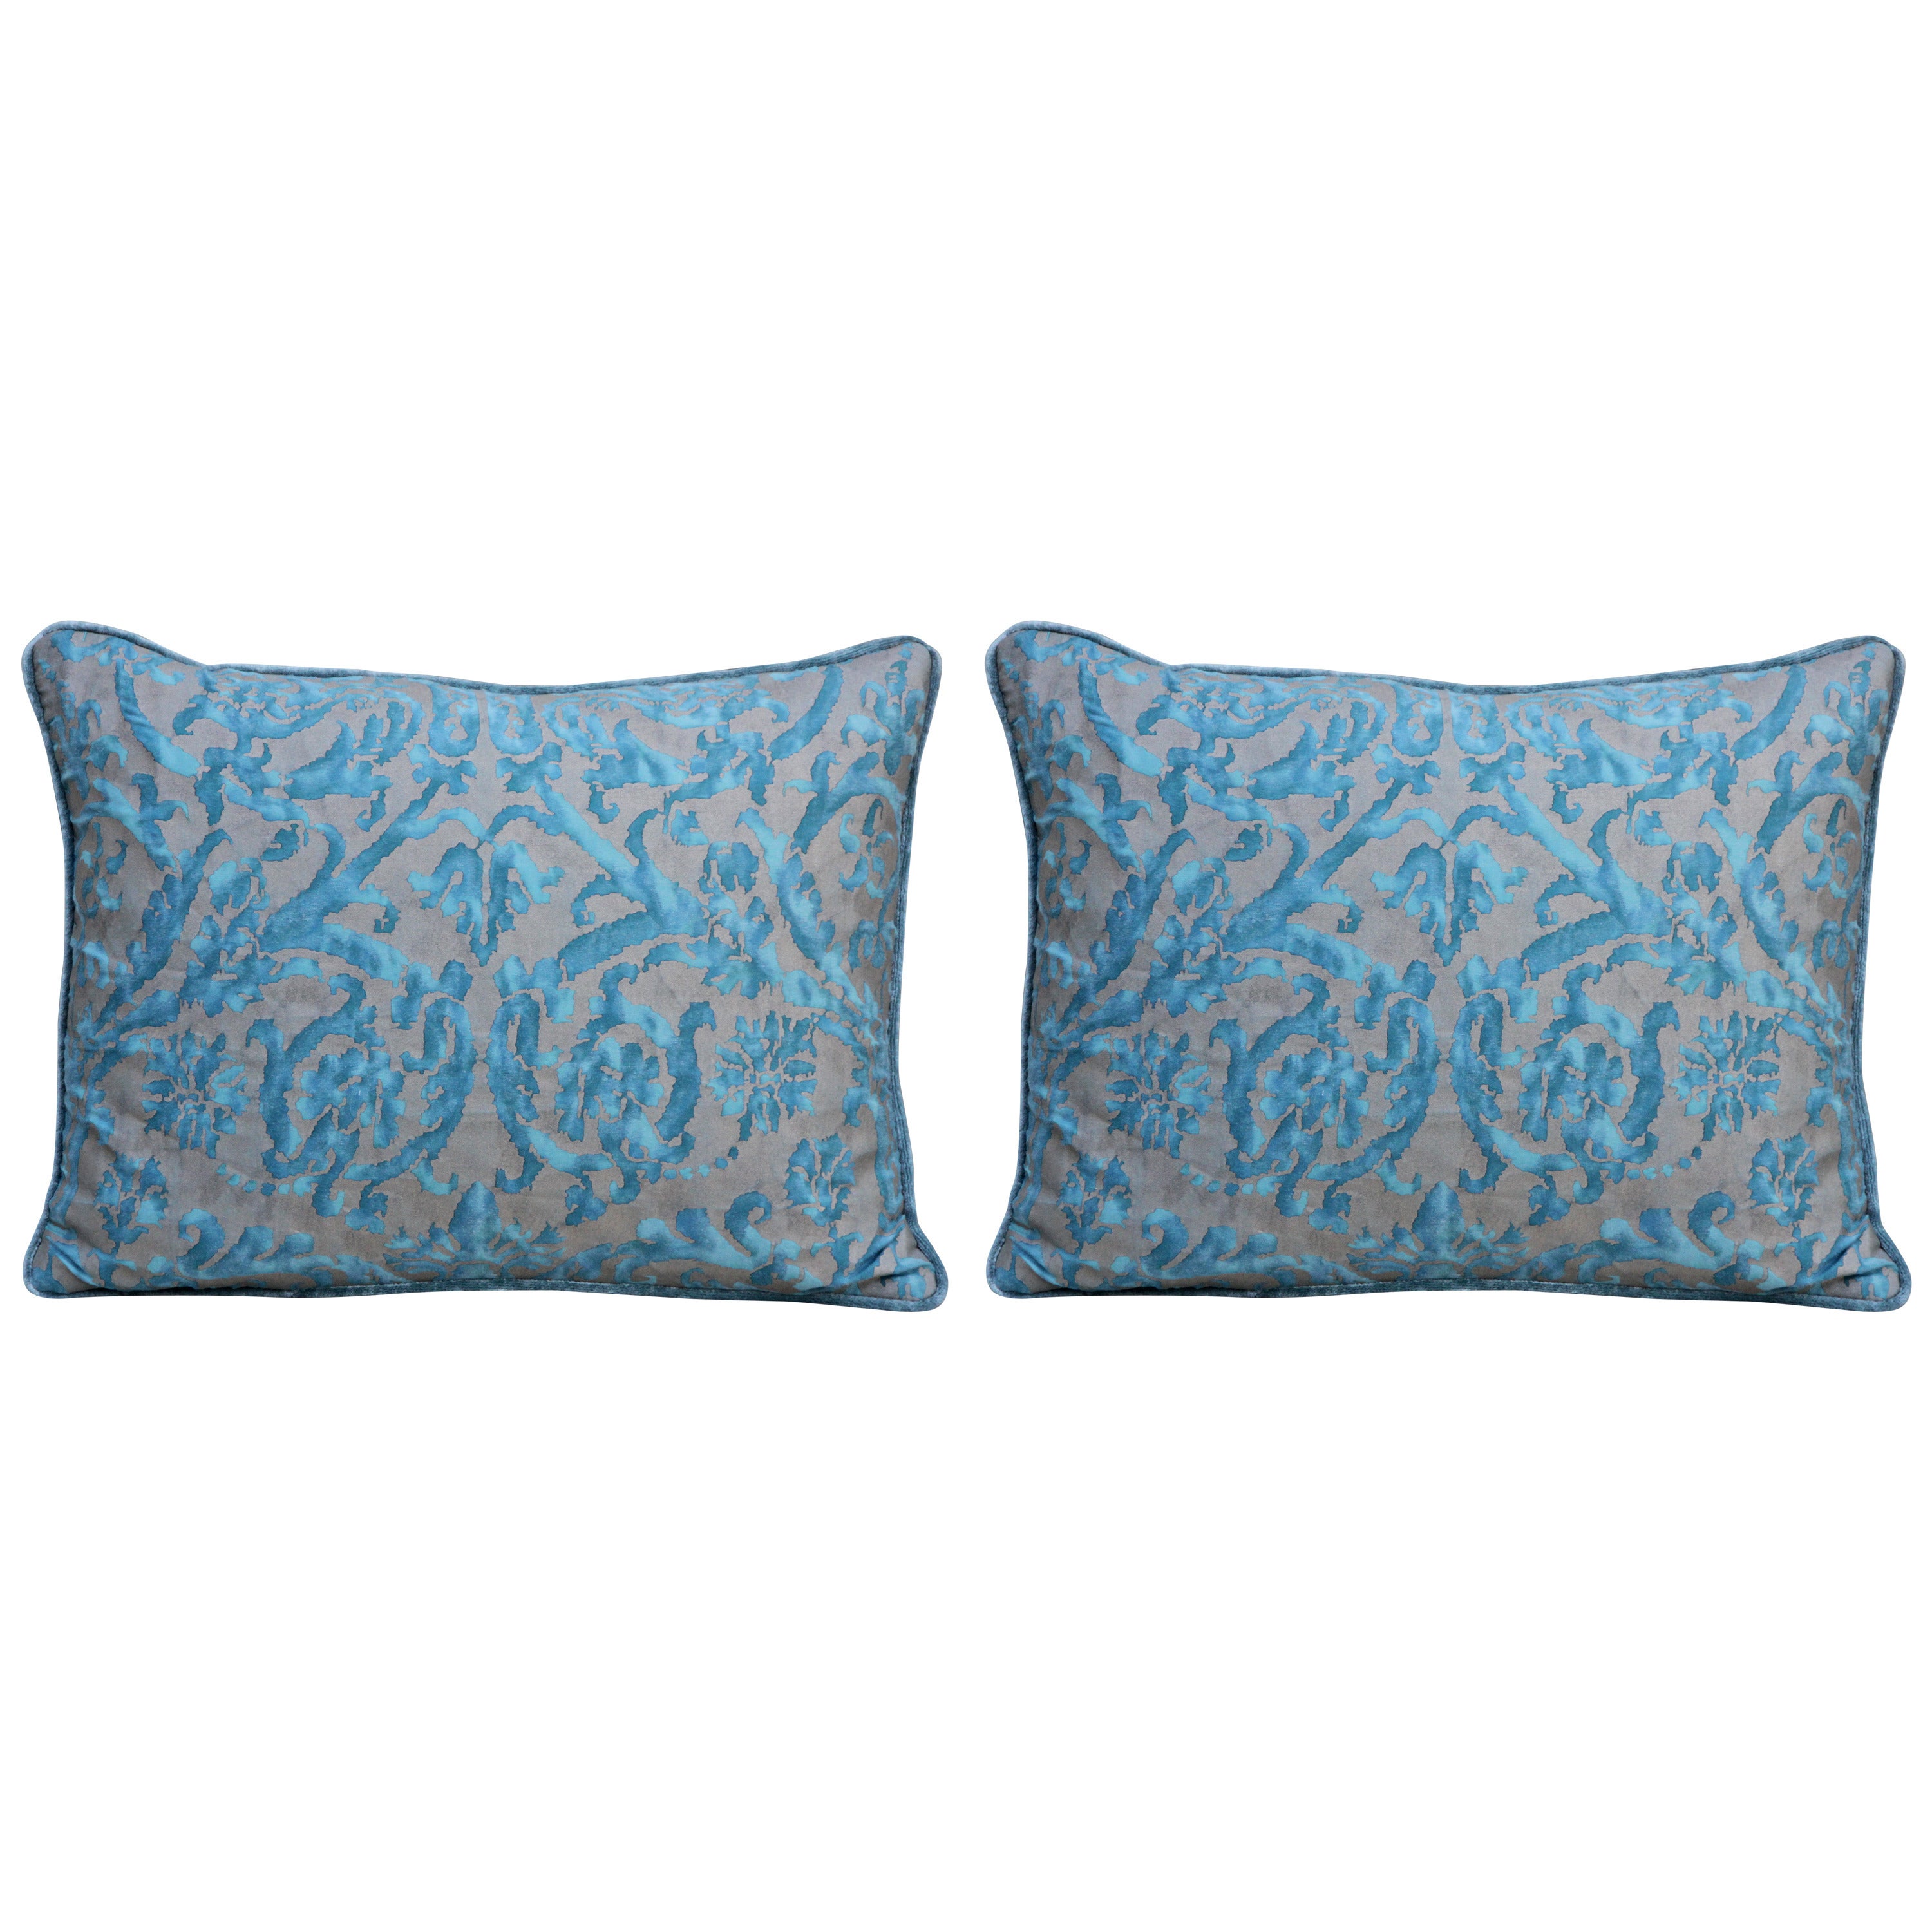 Pair of Farnese Patterned Fortuny Textile Pillows